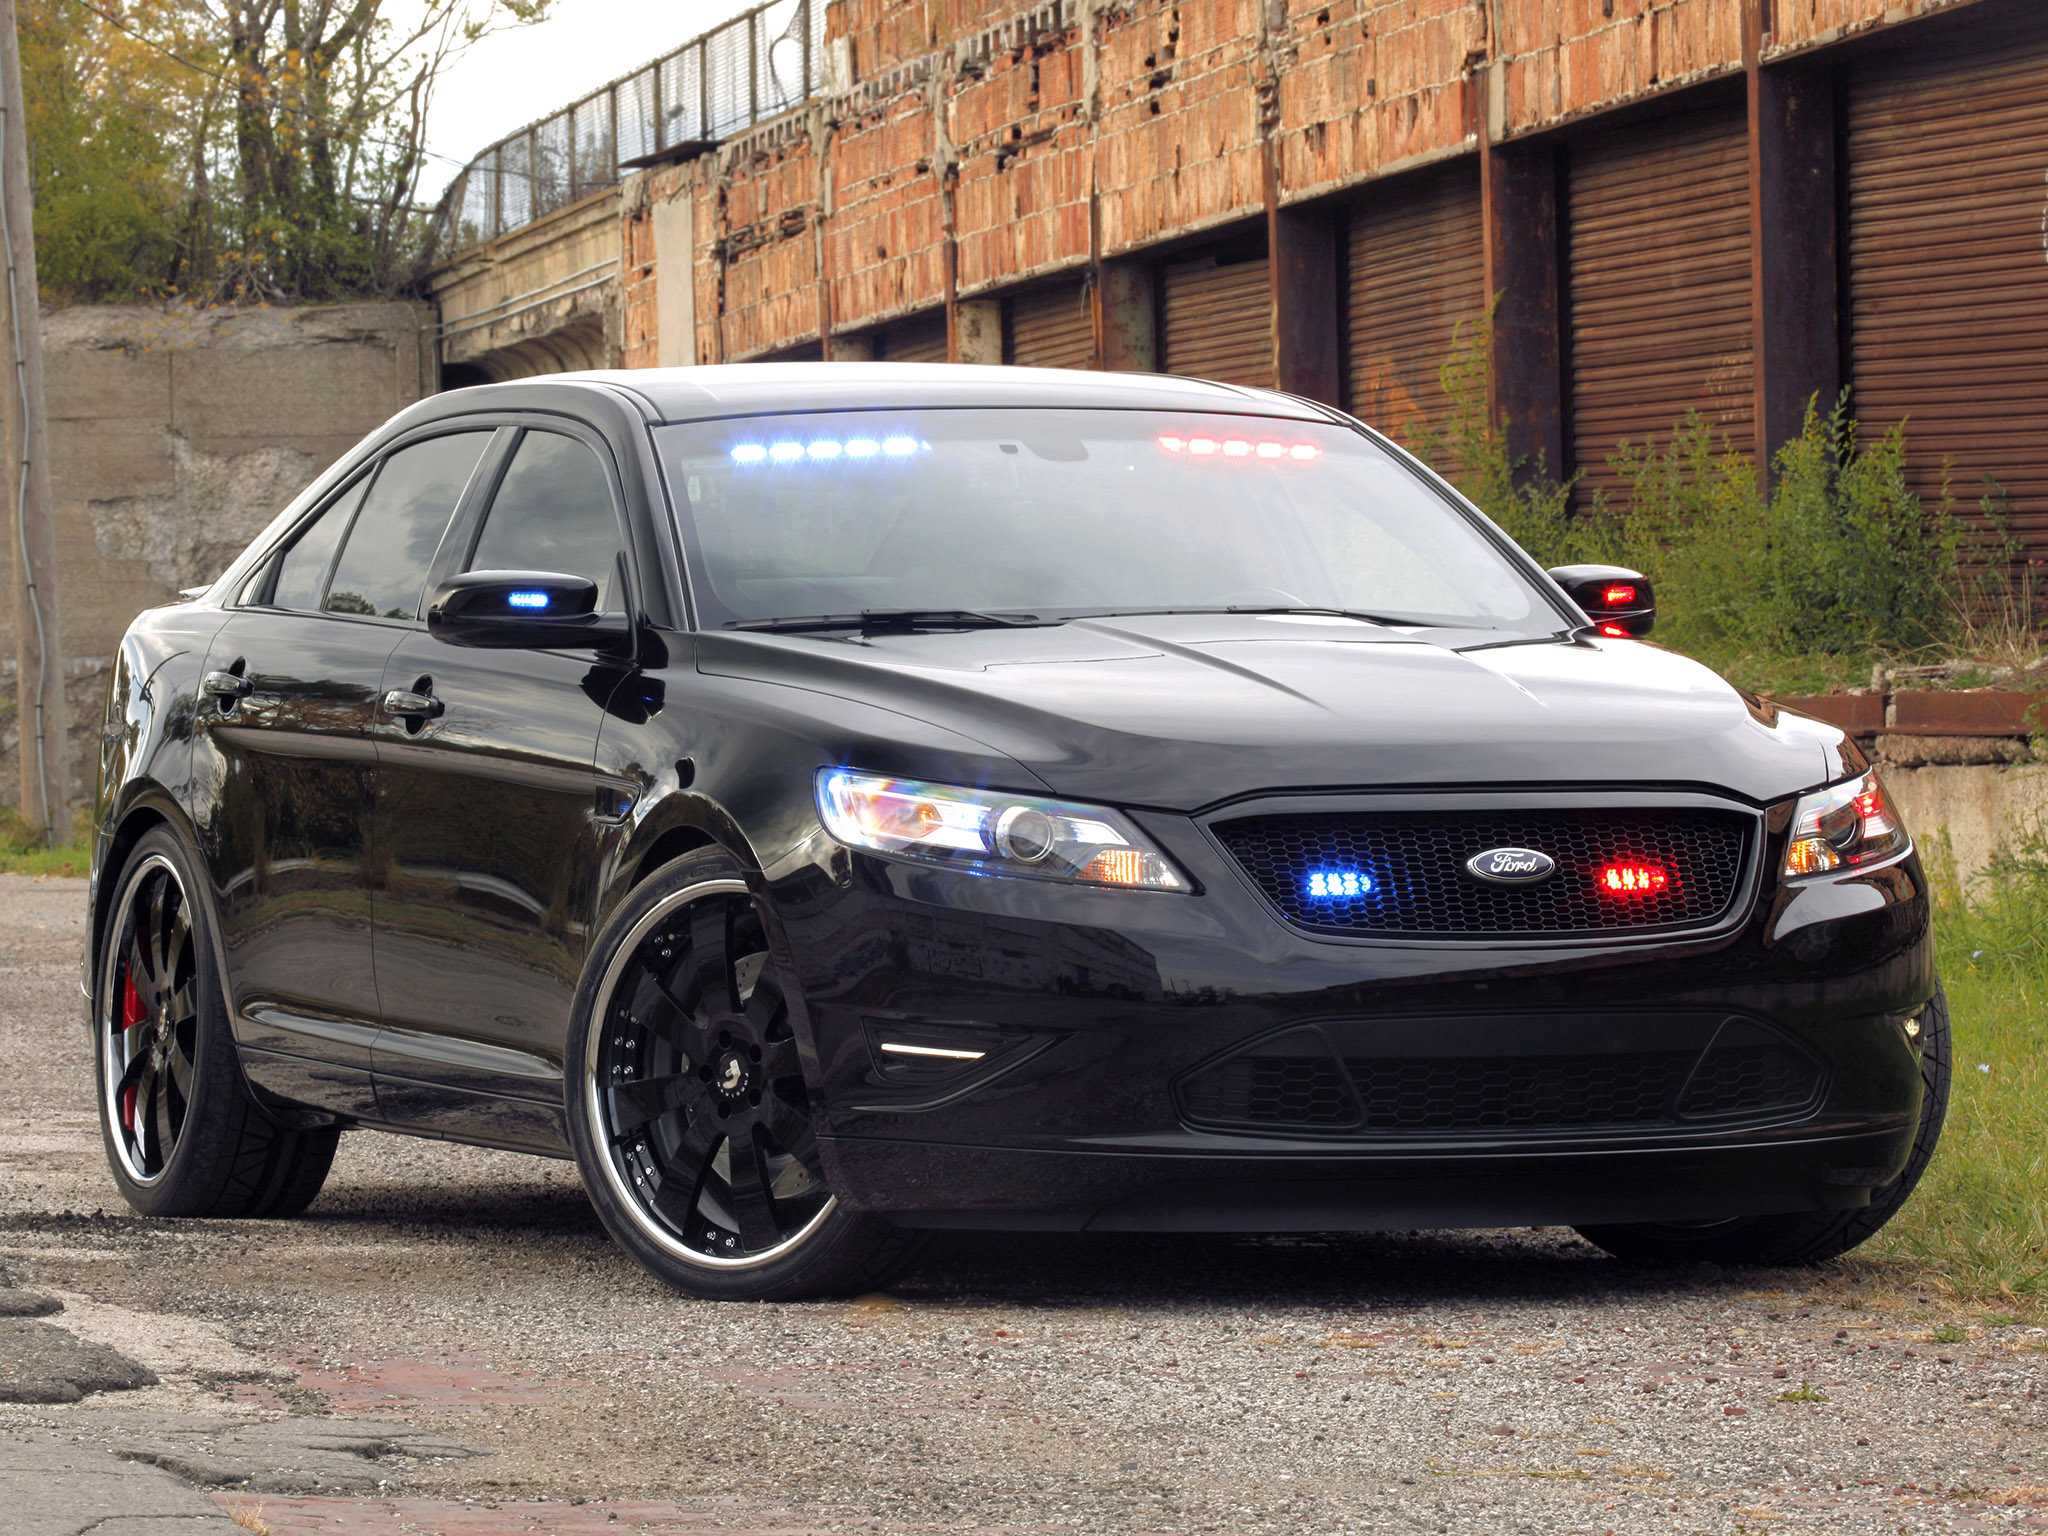 2013, Ford, Stealth, Police, Interceptor, Muscle Wallpaper